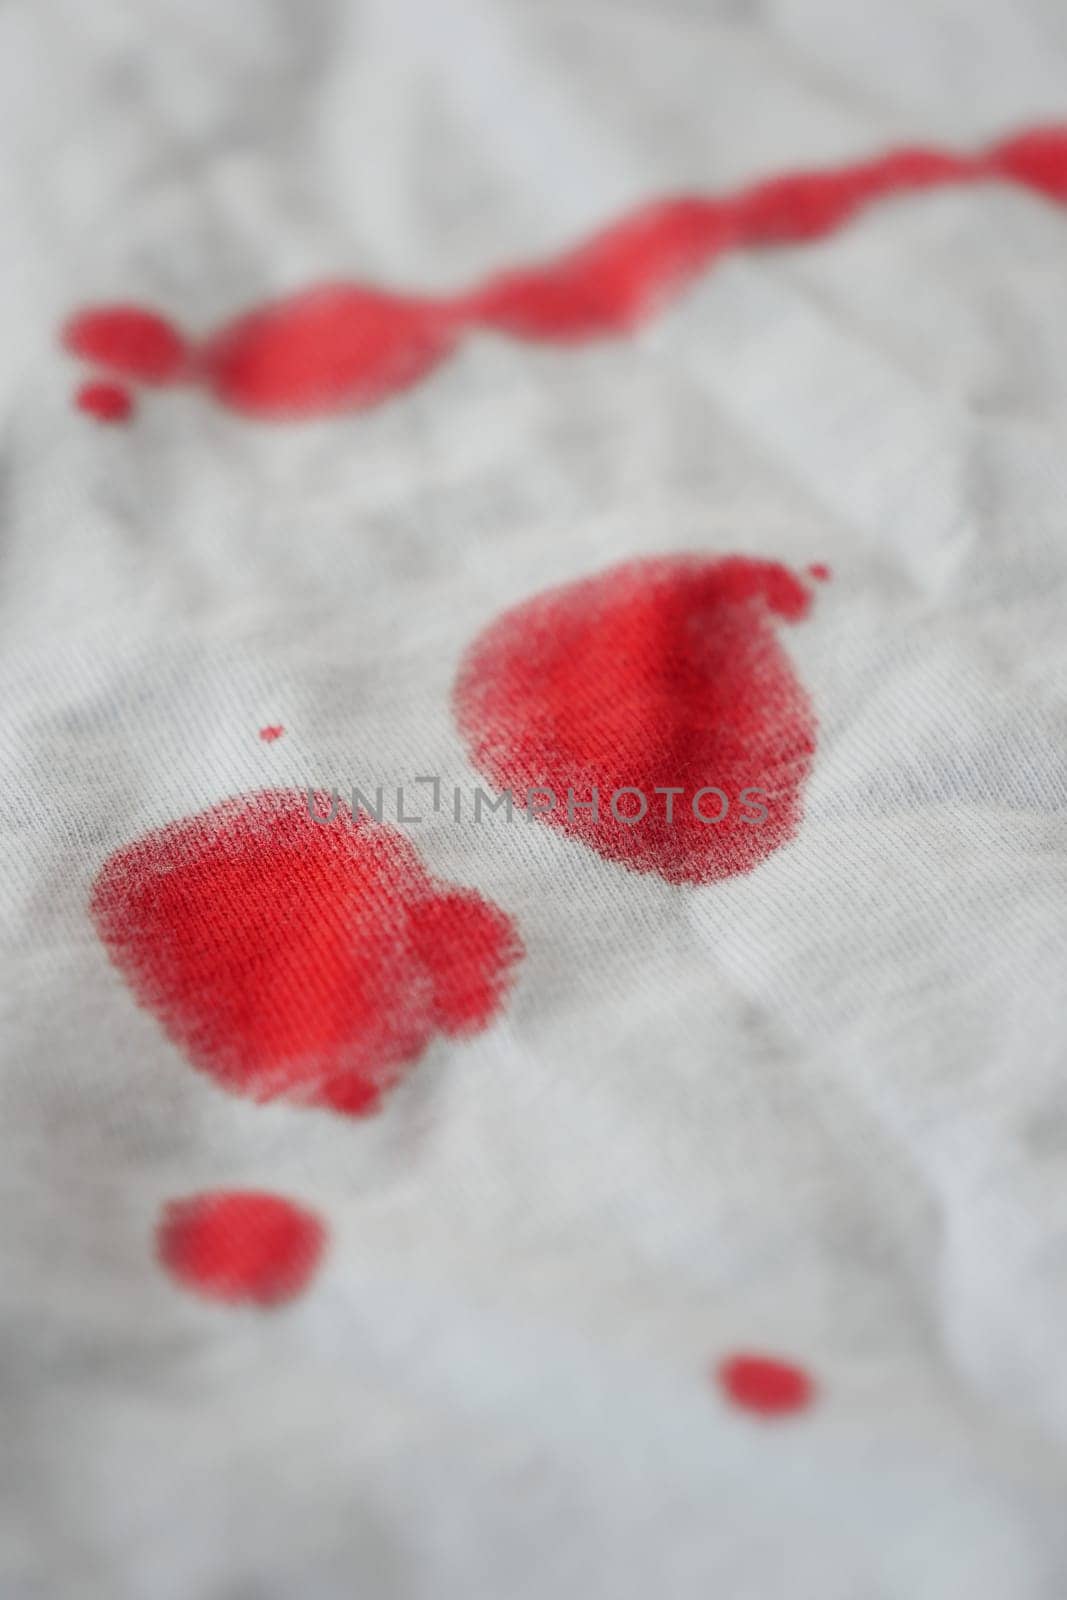 blood stains on a white shirt